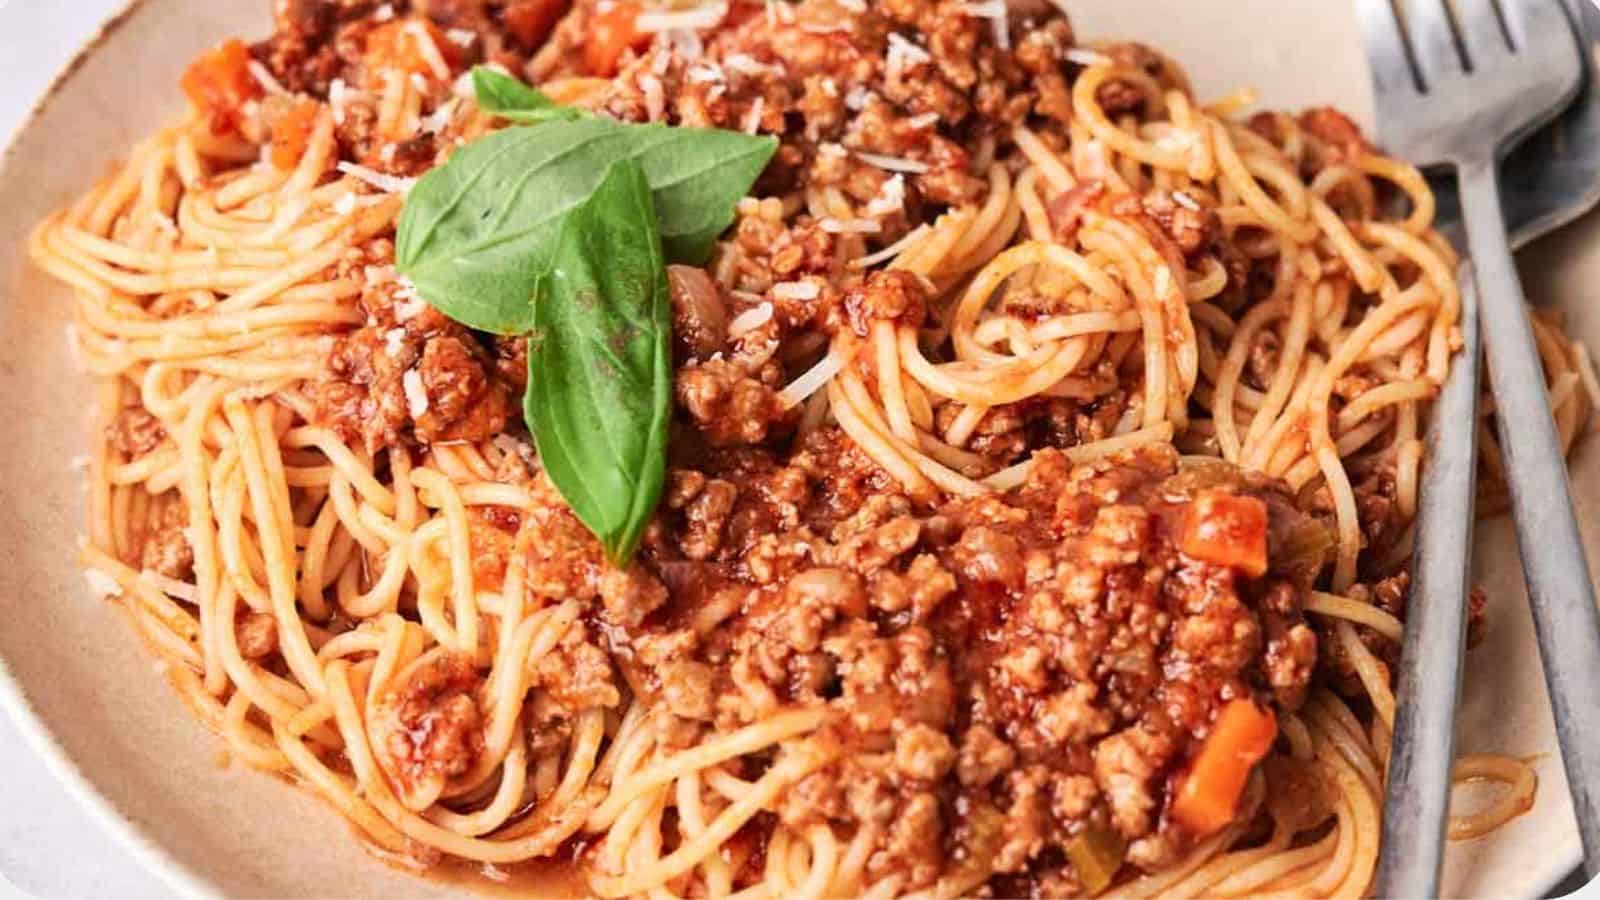 A plate of spaghetti topped with meat sauce and a fresh basil leaf, accompanied by a fork on the side.